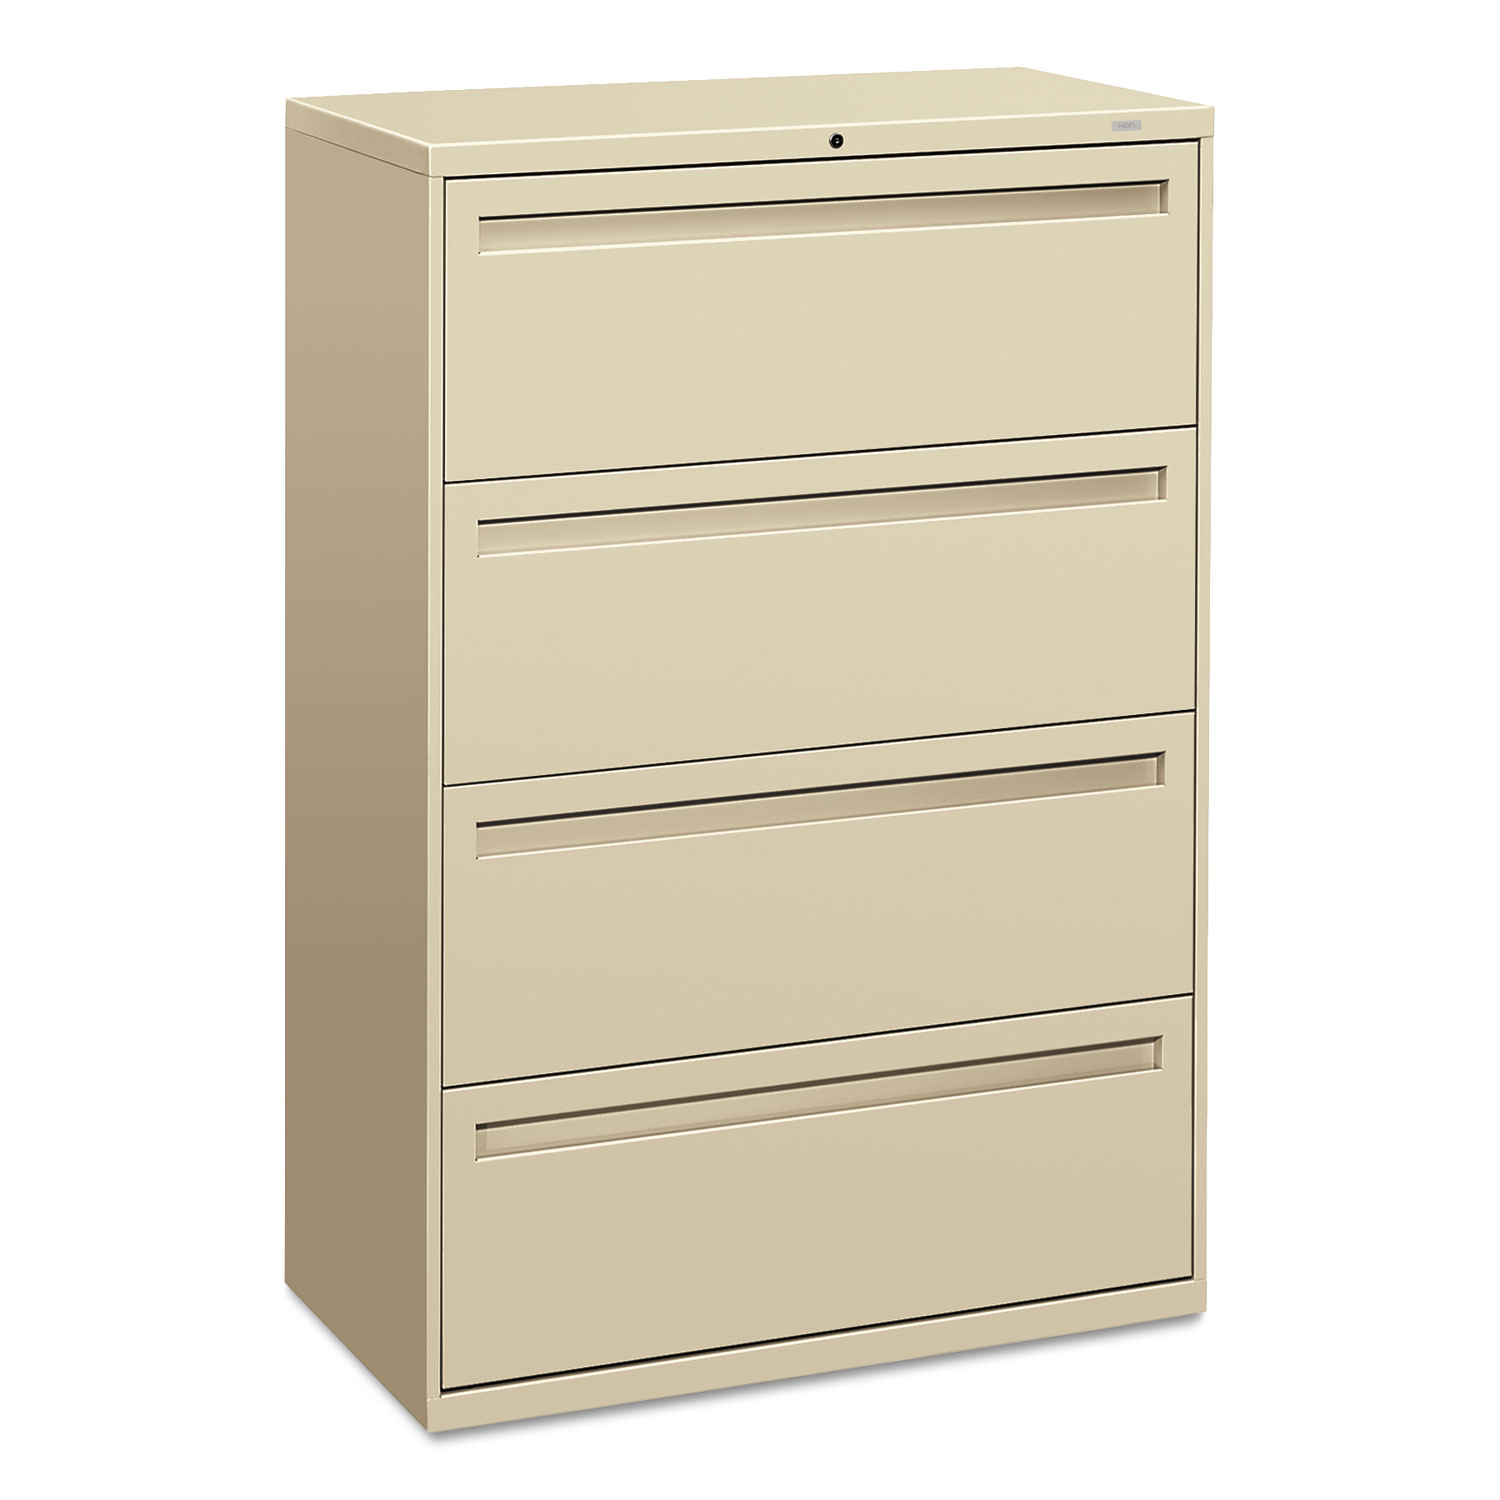 700 Series Four-Drawer Lateral File, 36w x 19-1/4d, Putty